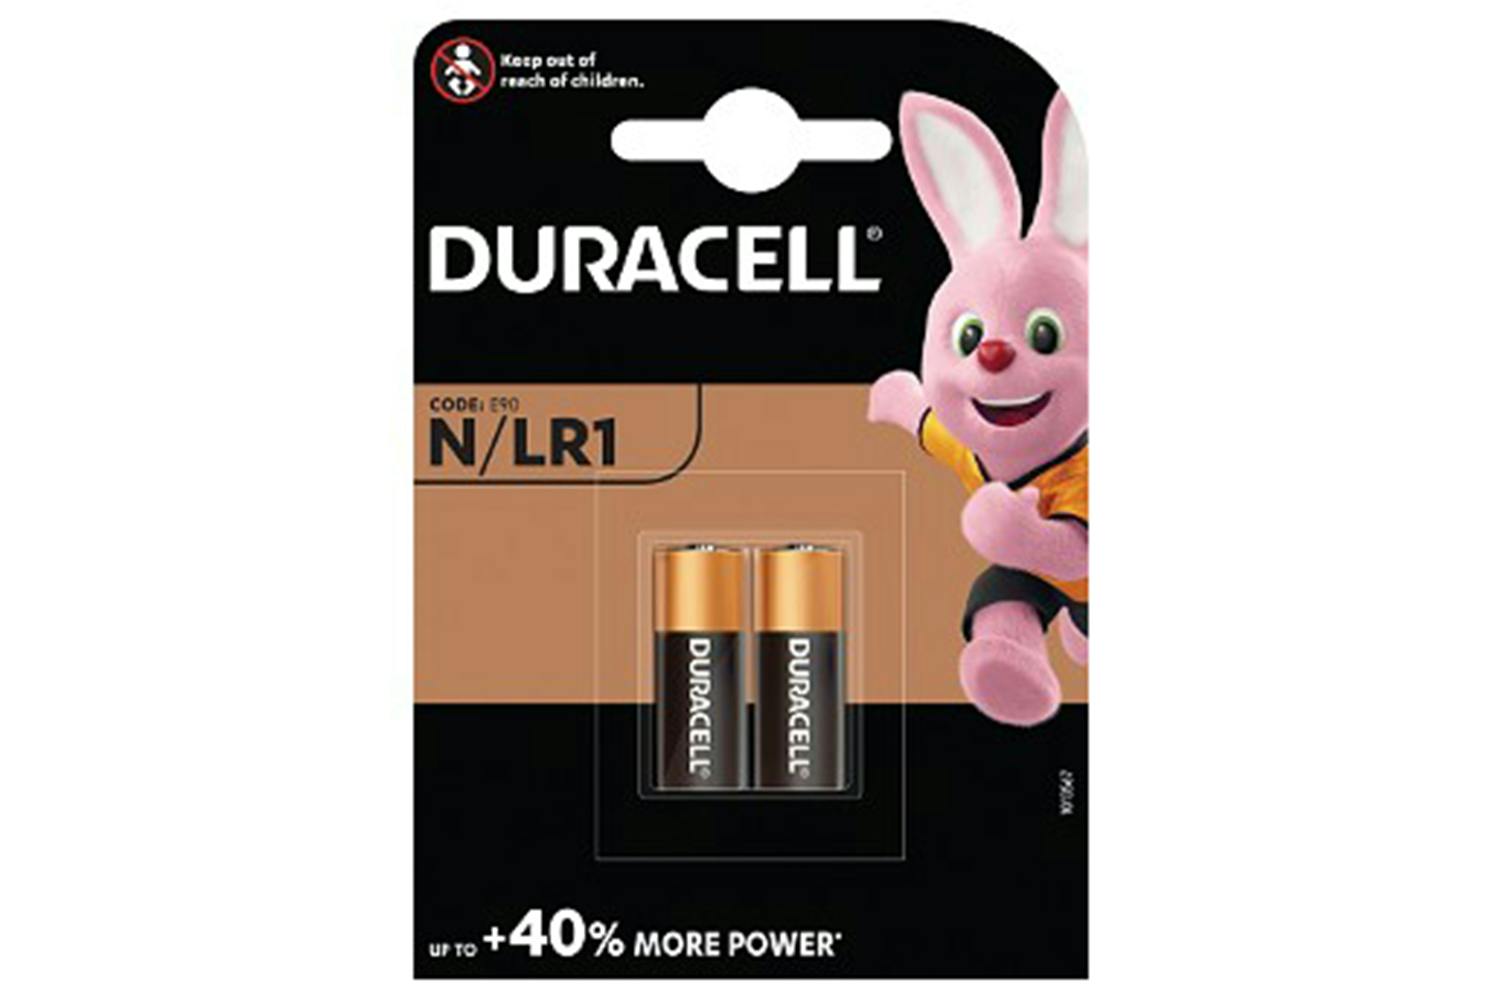 Duracell N / LR1 800 mAh Alkaline Security Battery | Pack of 2